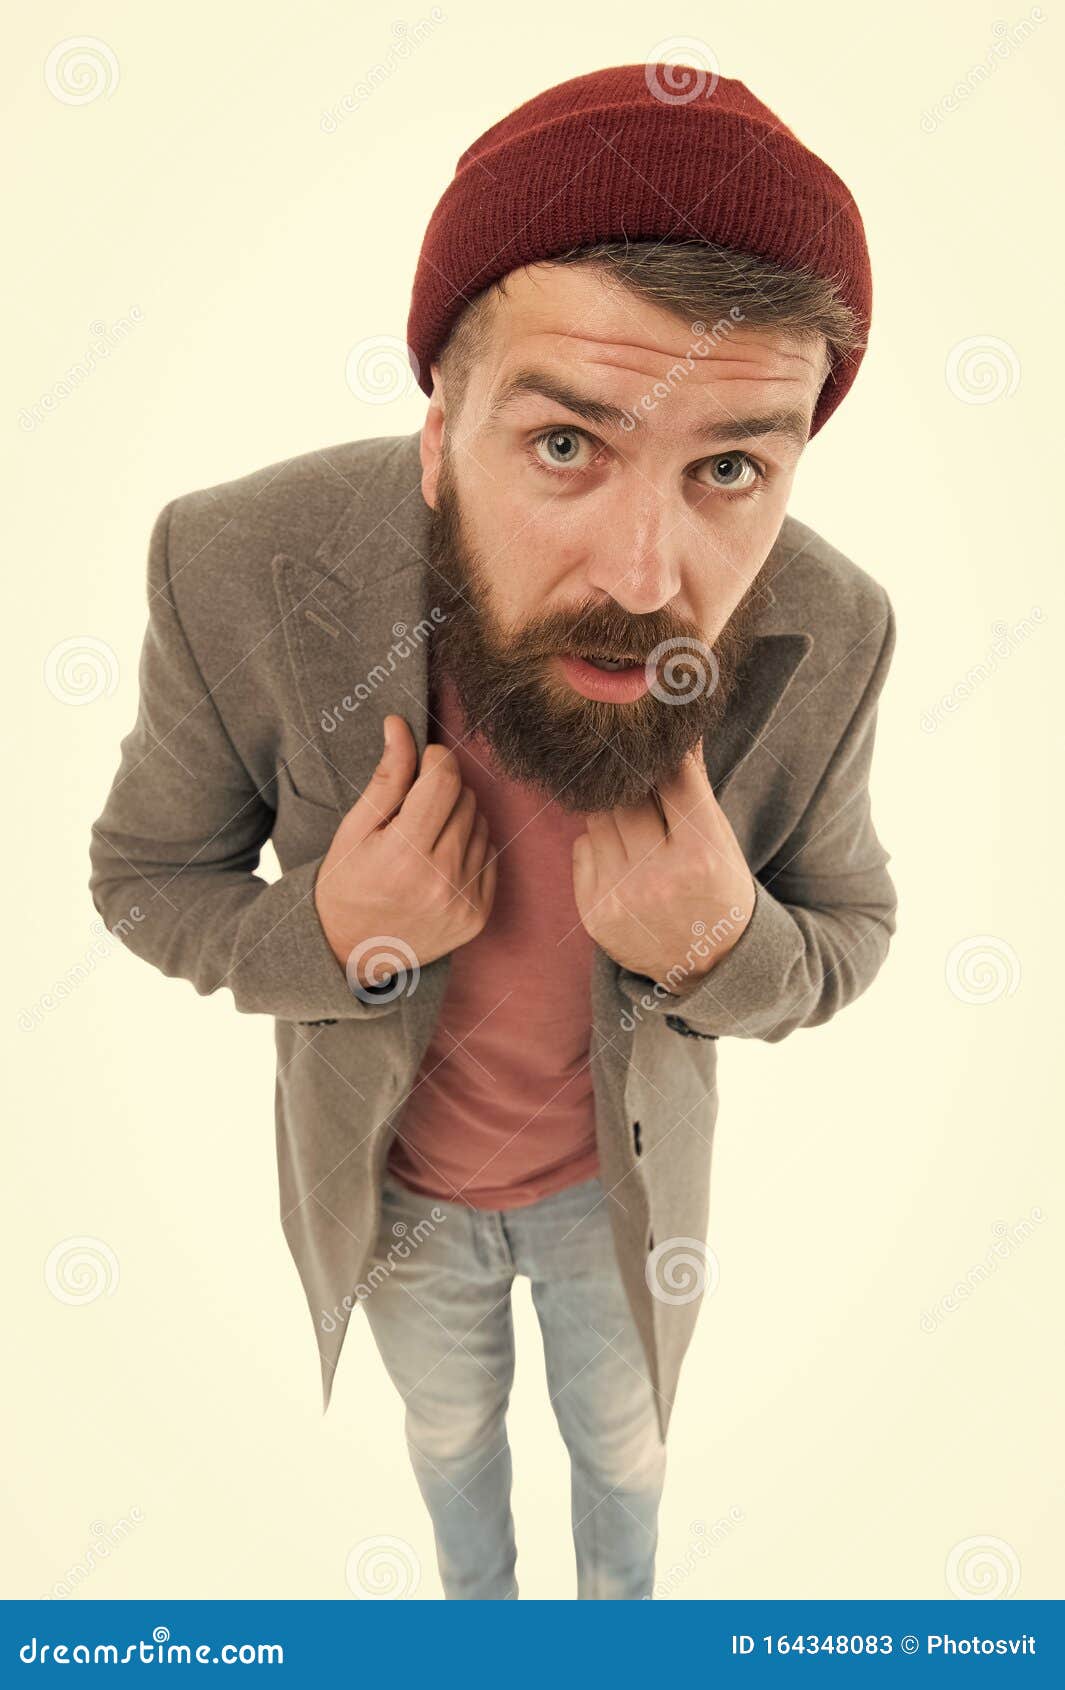 Dressing with Style. Trendy Hipster with Mustache and Beard in Brutal ...